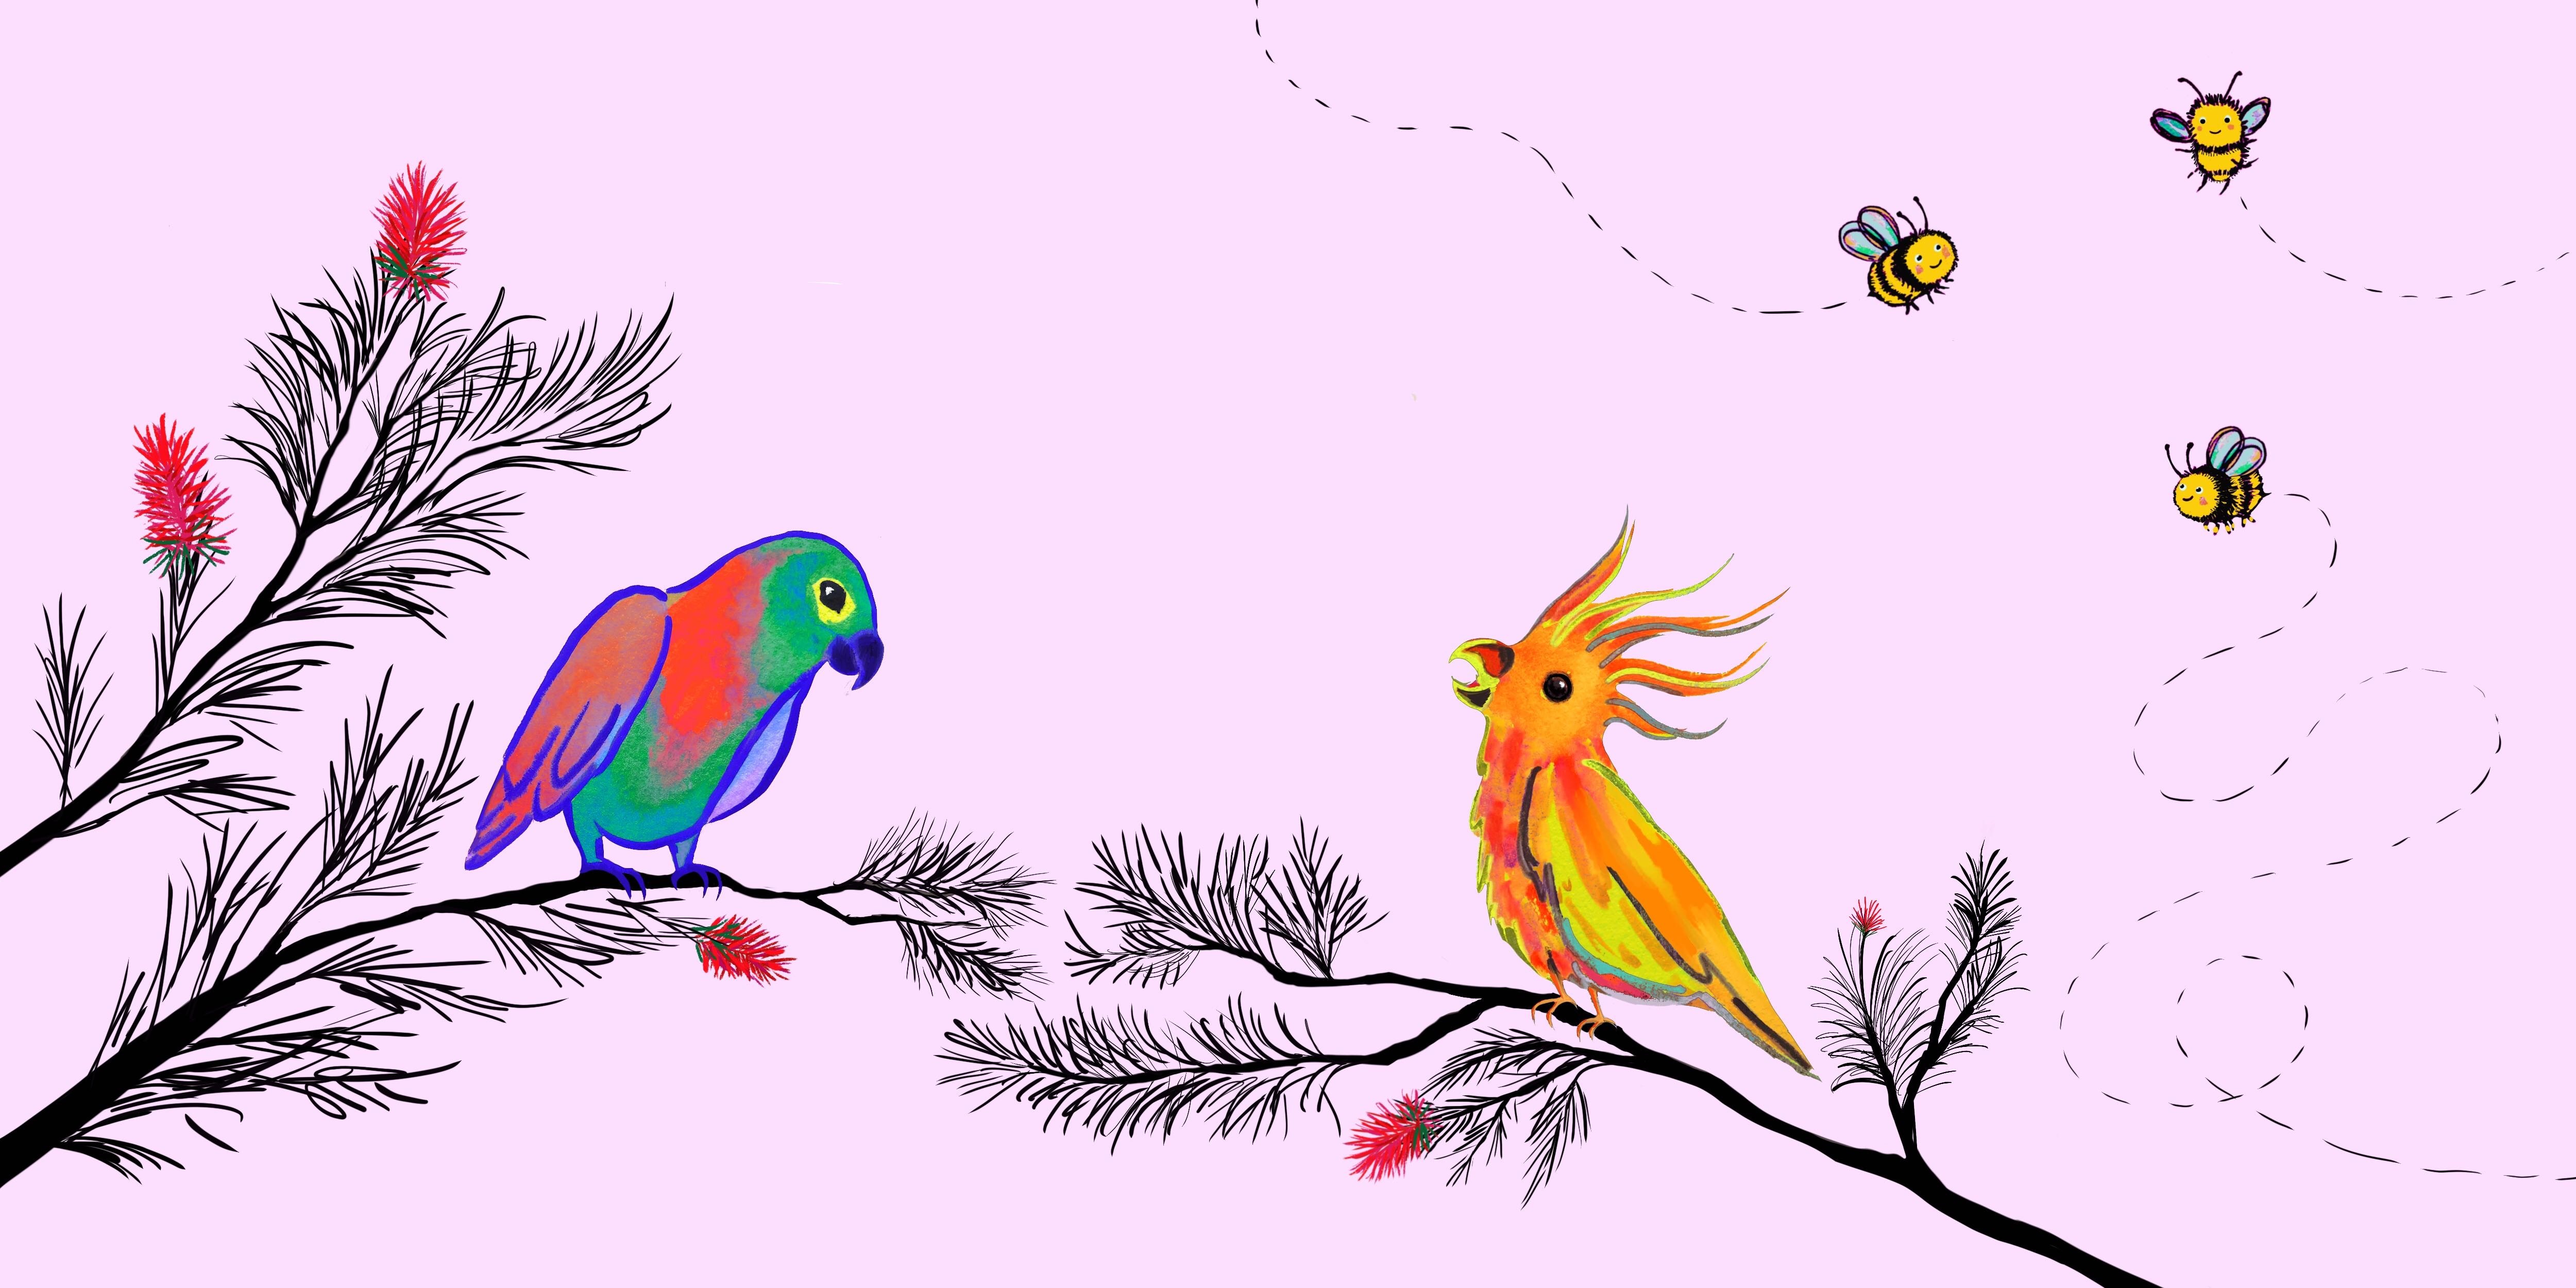 colorful drawing of birds and bees against pink background